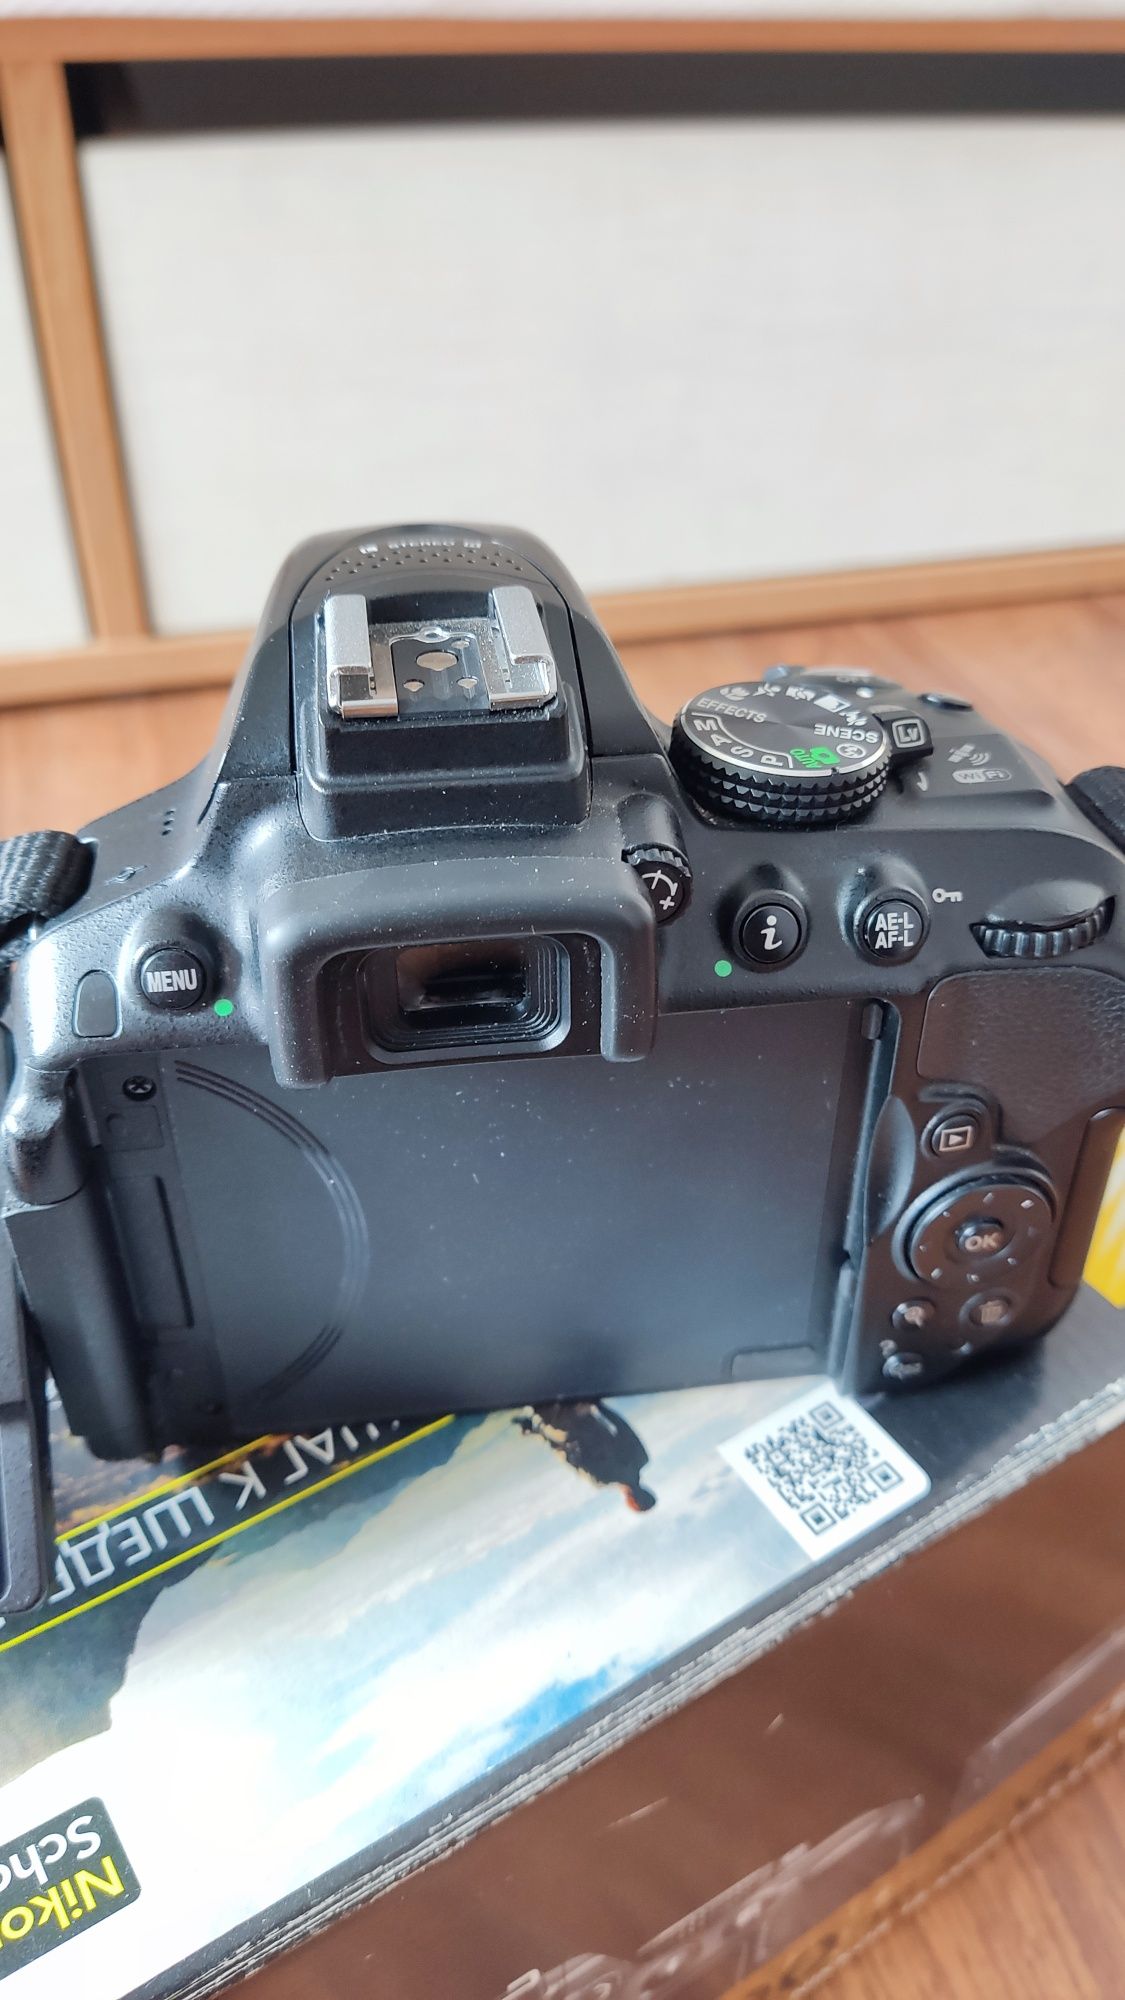 Nikon Camera D5300- New condition - Mileage only 12k. Only body